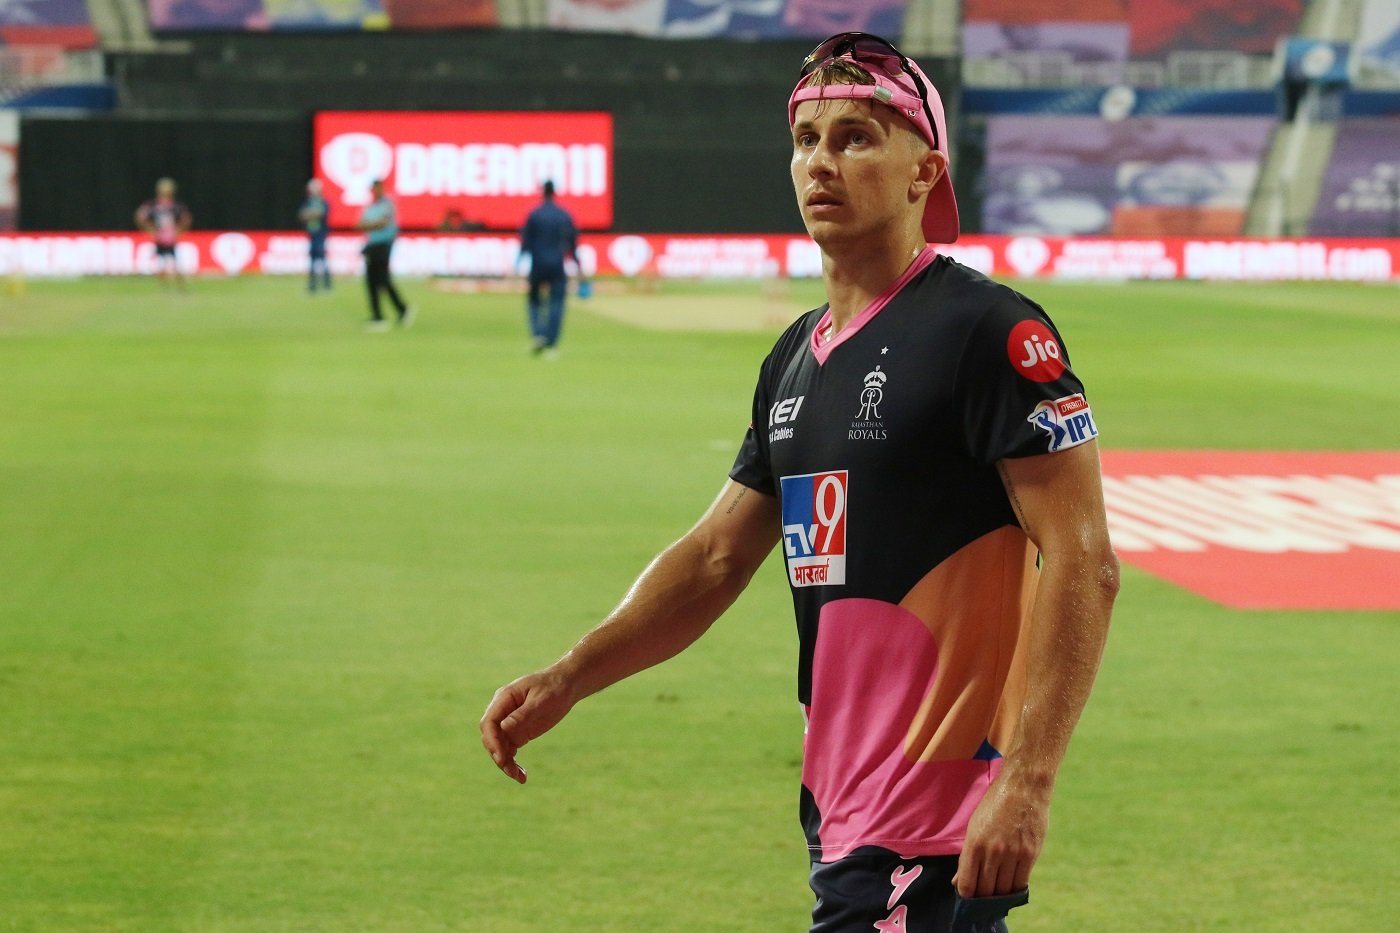 Sam Curran opens up playing against his brother Tom Curran in IPL